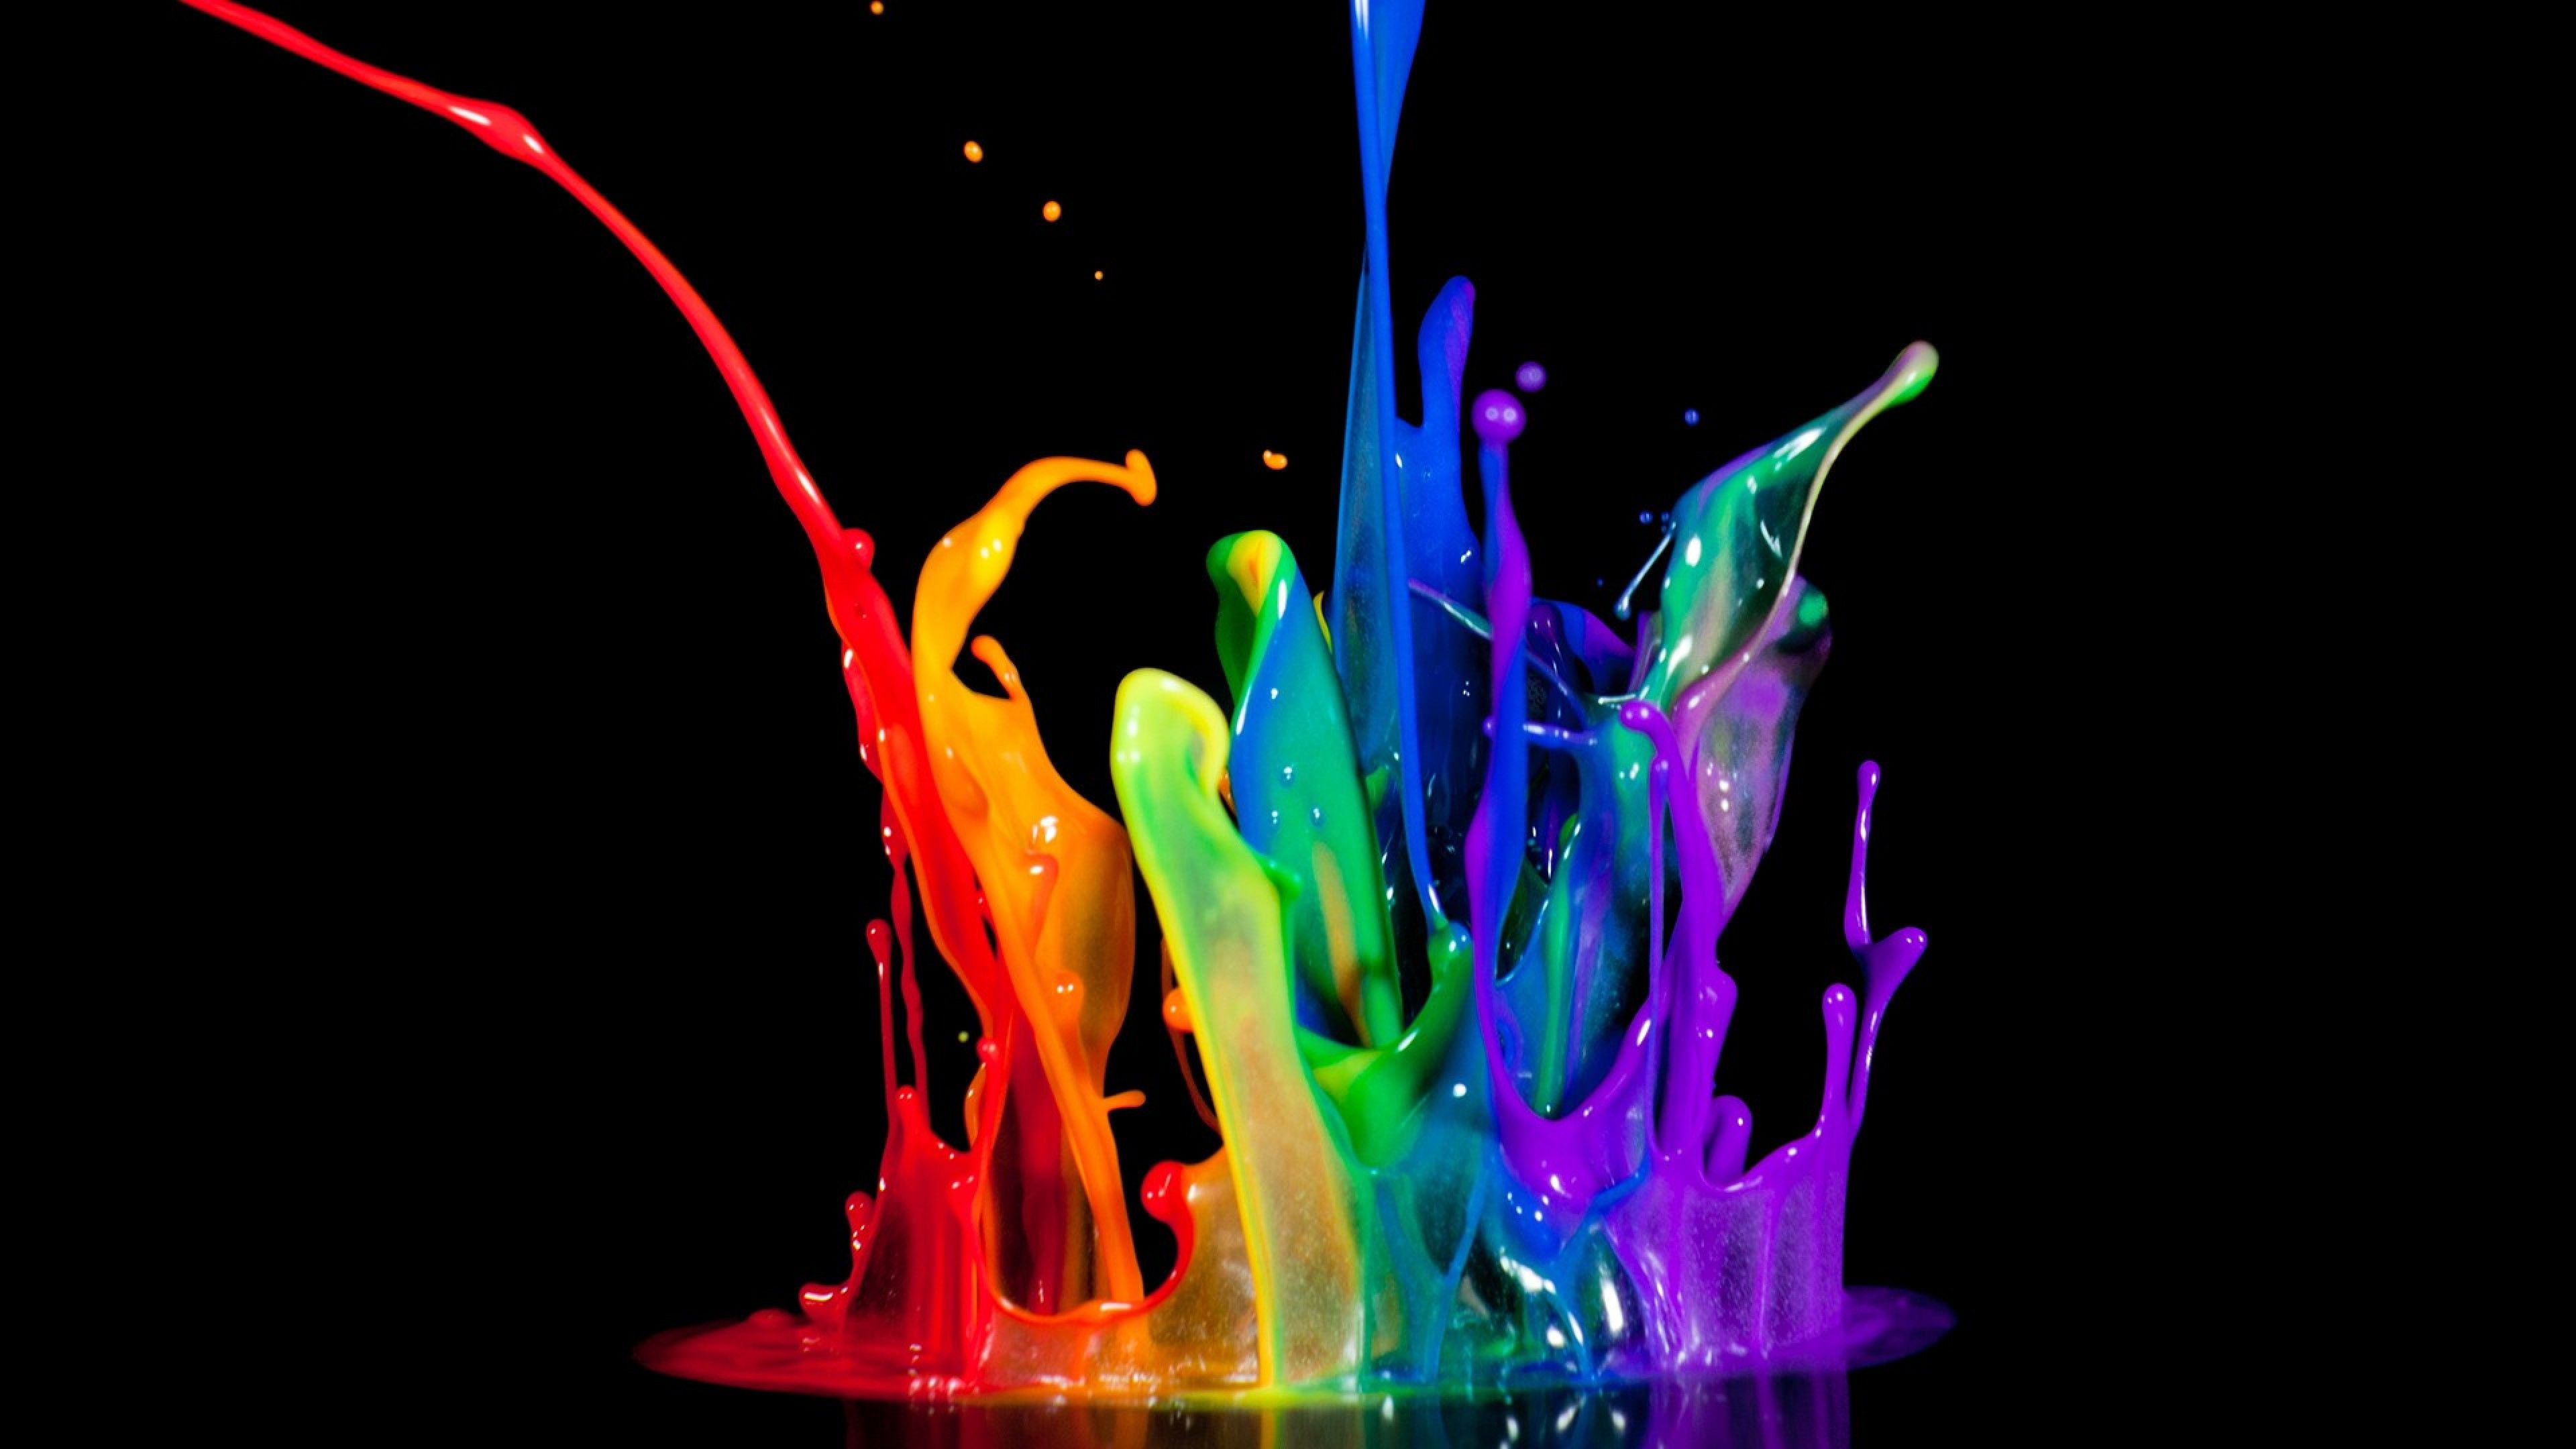 Multi Abstract Colorful Free HD Wallpaper for Desktop and Mobiles 4K Ultra HD